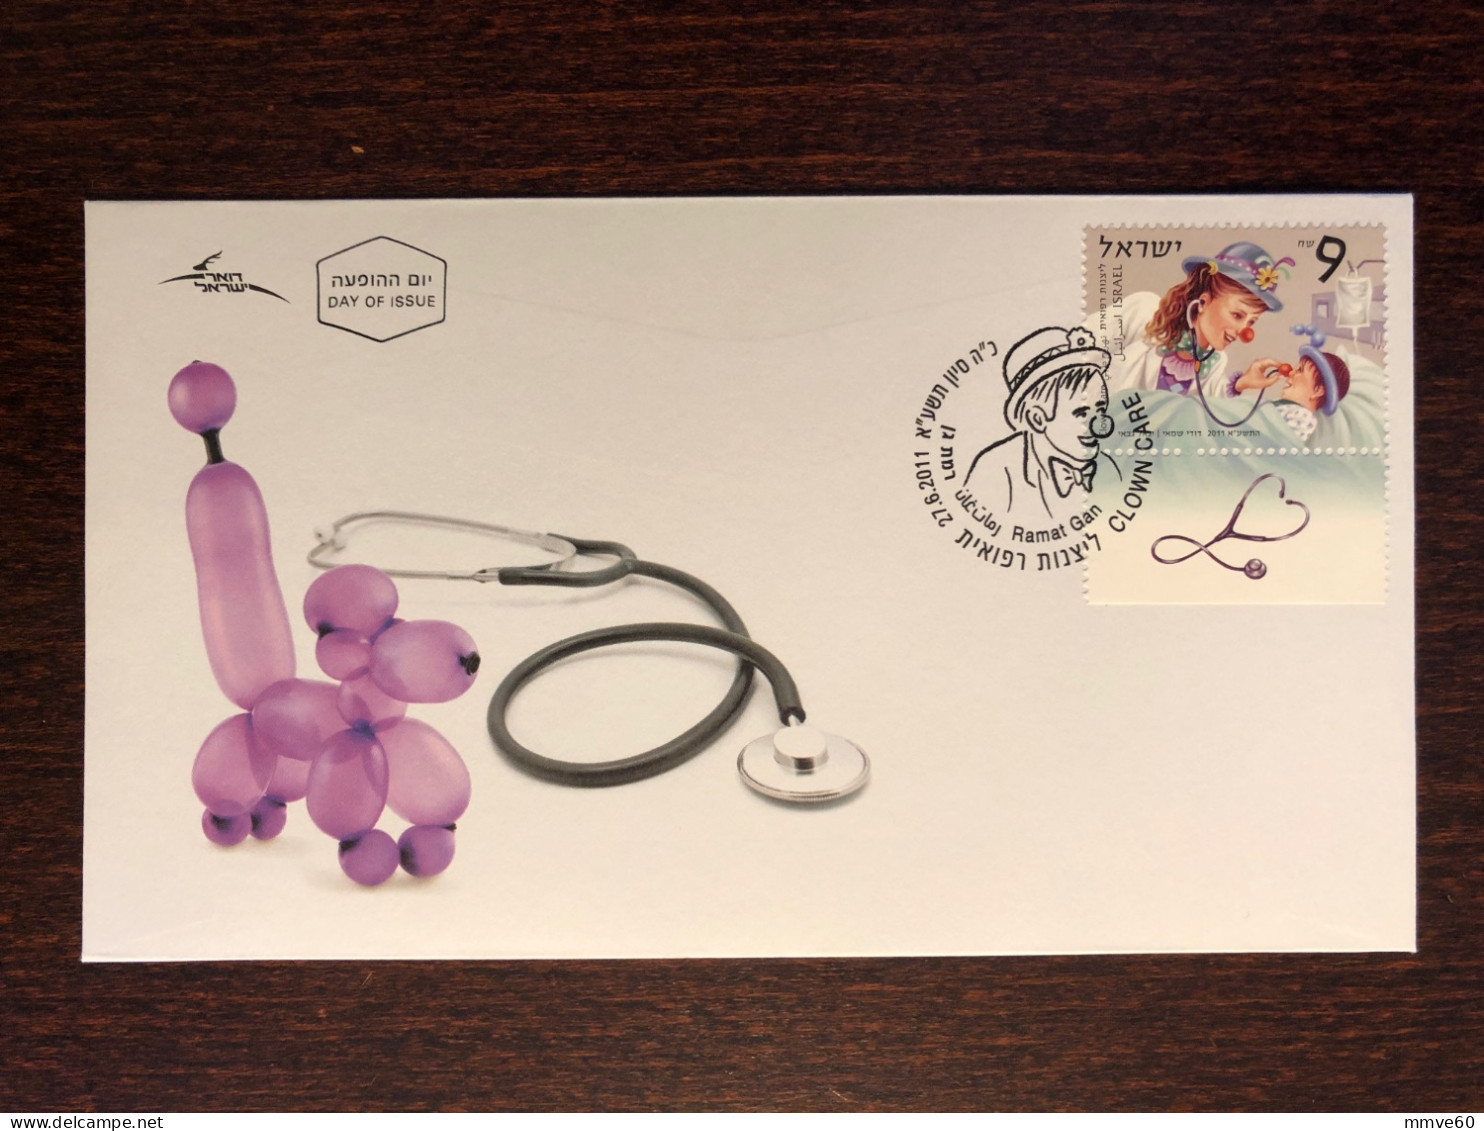 ISRAEL FDC COVER 2011 YEAR DOCTOR CLOWN CHILDREN HOSPITAL HEALTH MEDICINE STAMPS - FDC